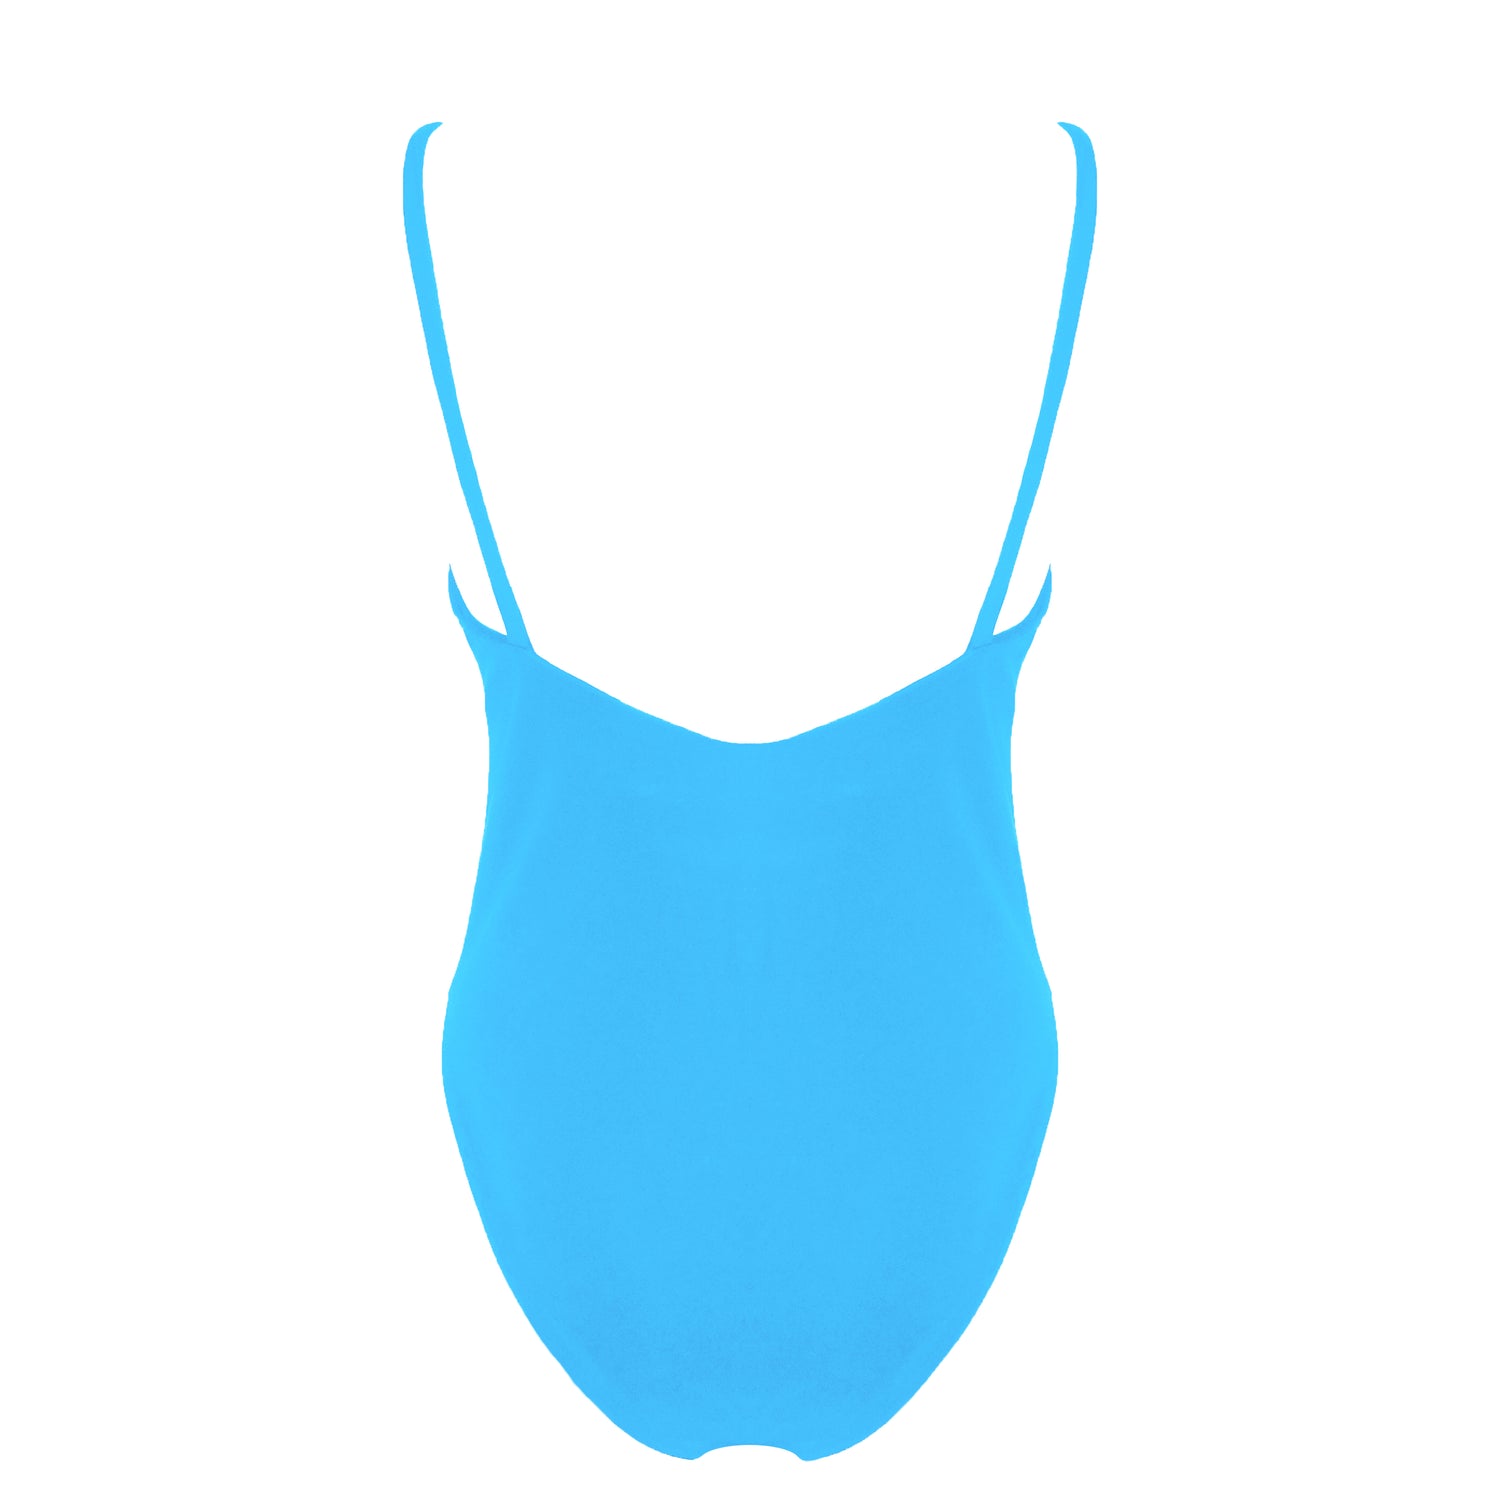 Back view of acqua blue simplistic plunging v-neck one piece swimsuit with a low v-back, high cut legs and full coverage.